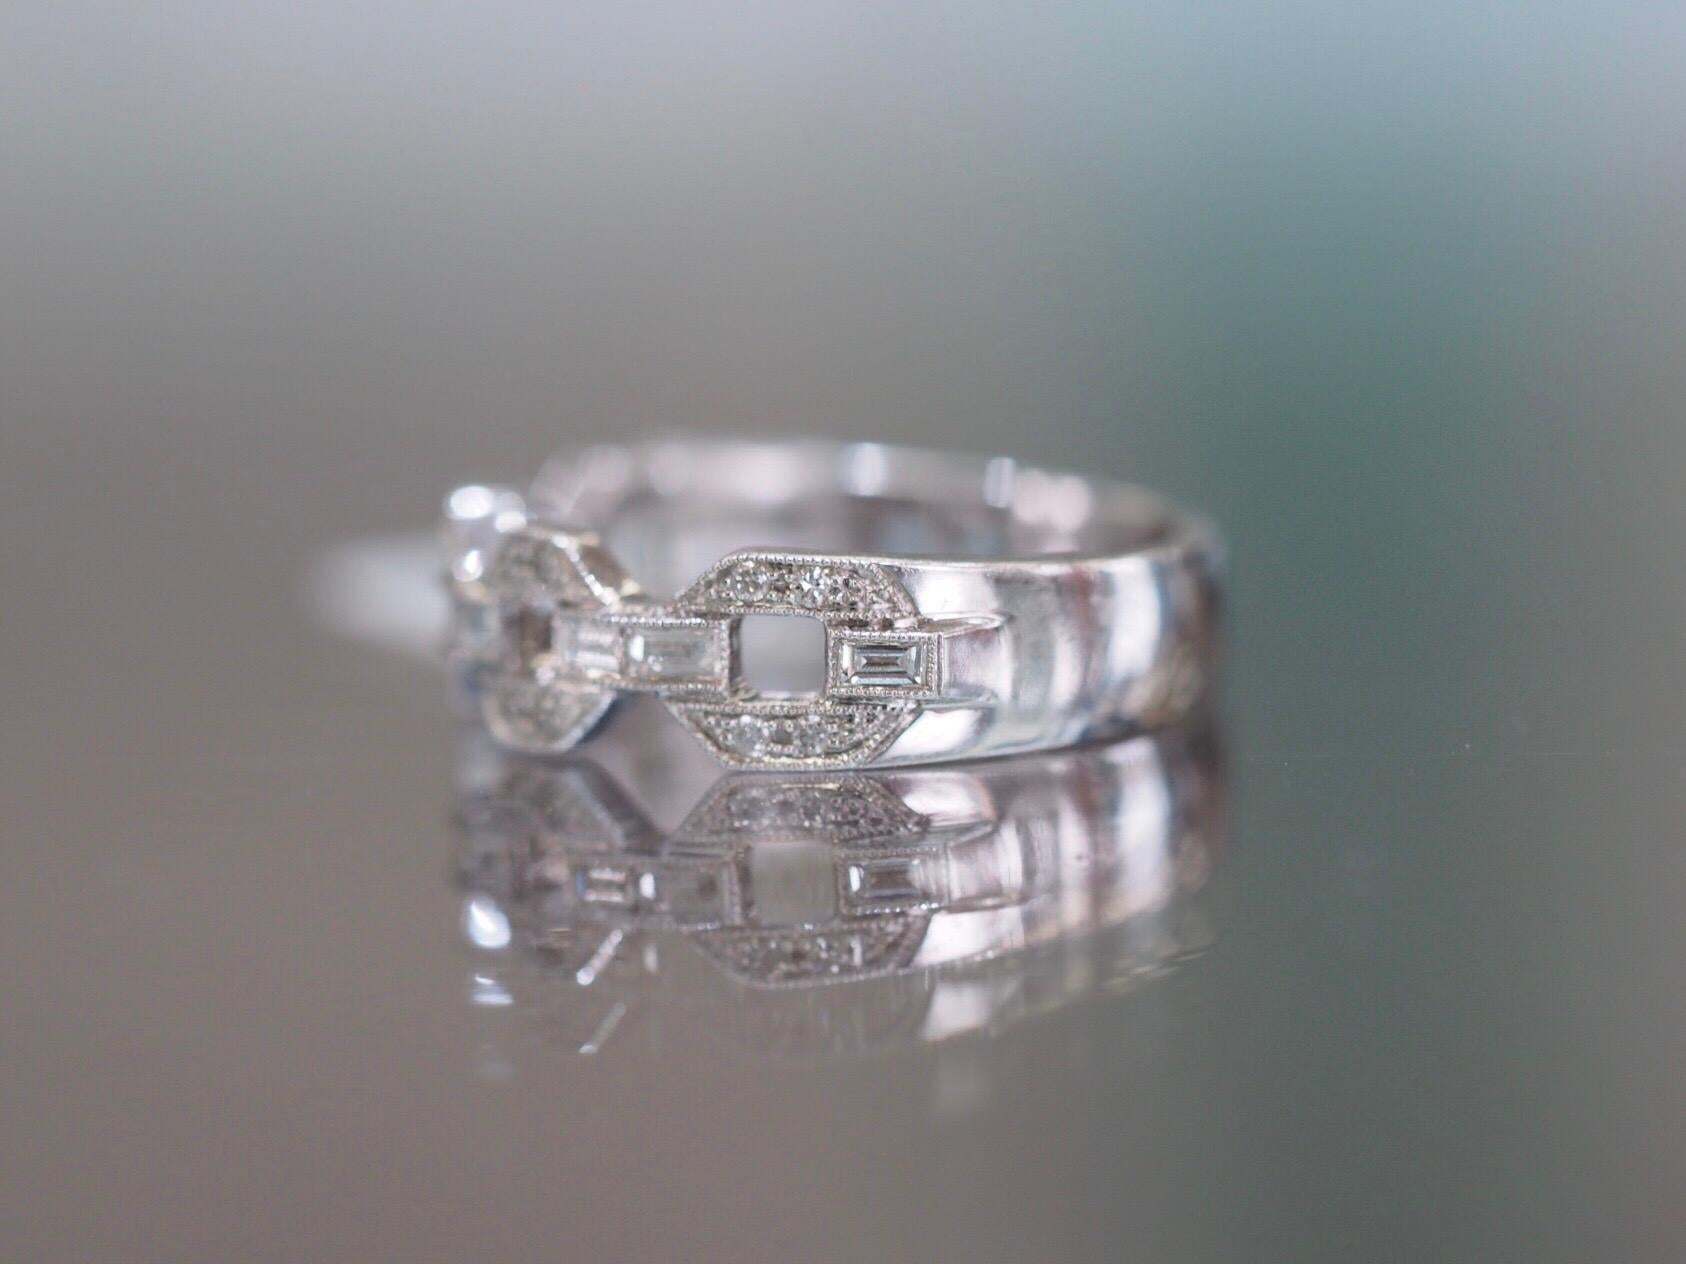 This 18k white gold band features four hexagon silhouettes with melee diamonds and connecting pairs of baguette diamonds with a milgrain edging giving it the perfect modern day vintage look. It has 0.35ctw of round brilliant cut diamonds and emerald